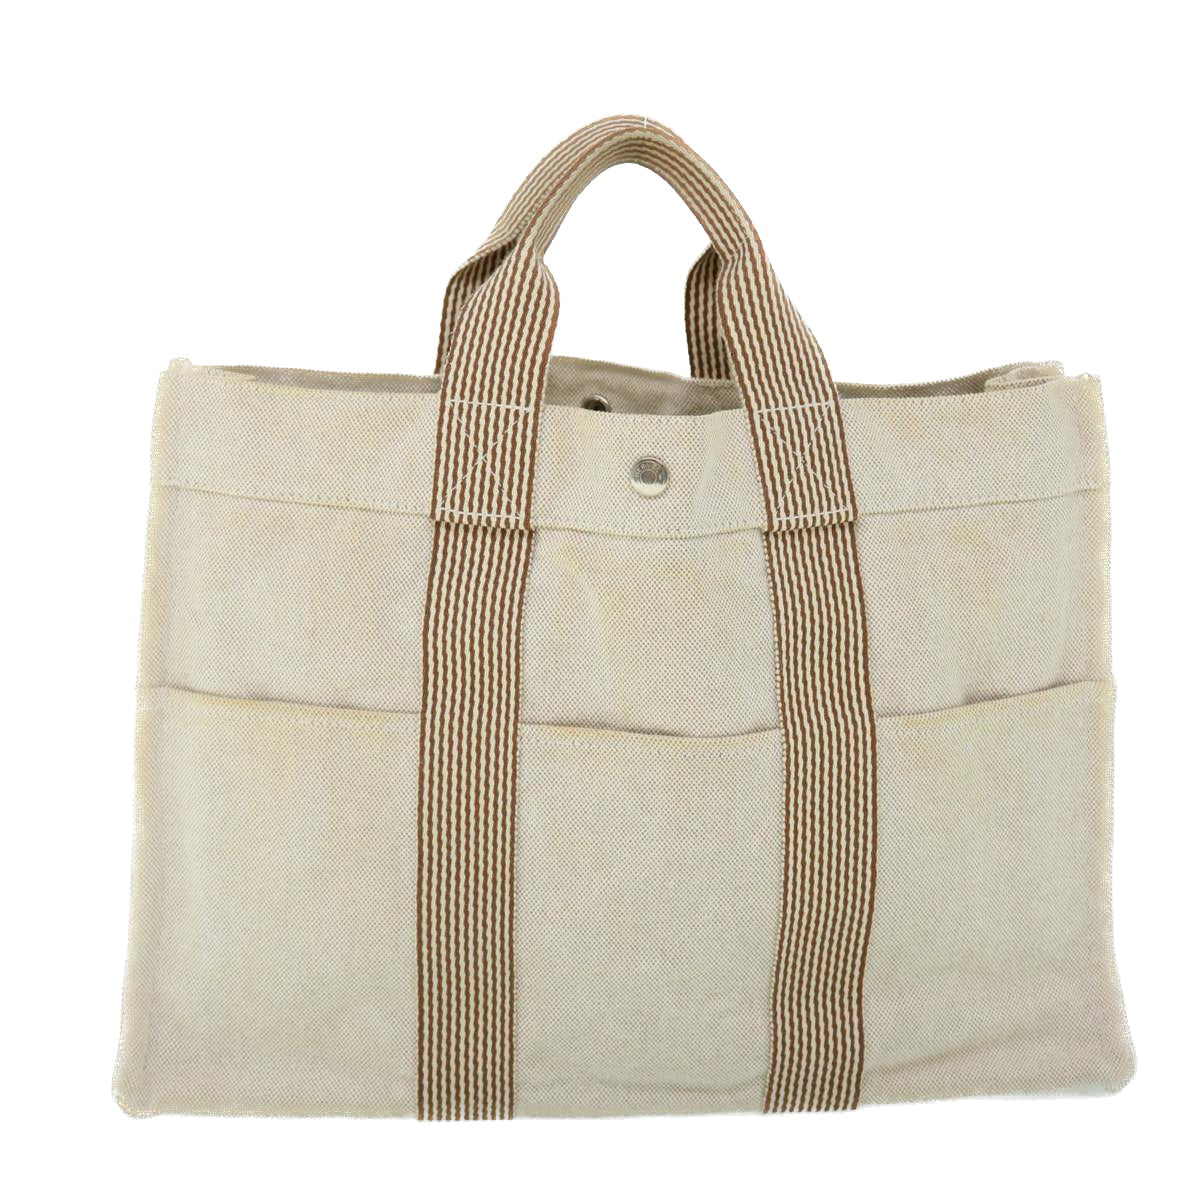 HERMES Her Line MM Hand Bag Canvas Beige Auth bs8300 - 0